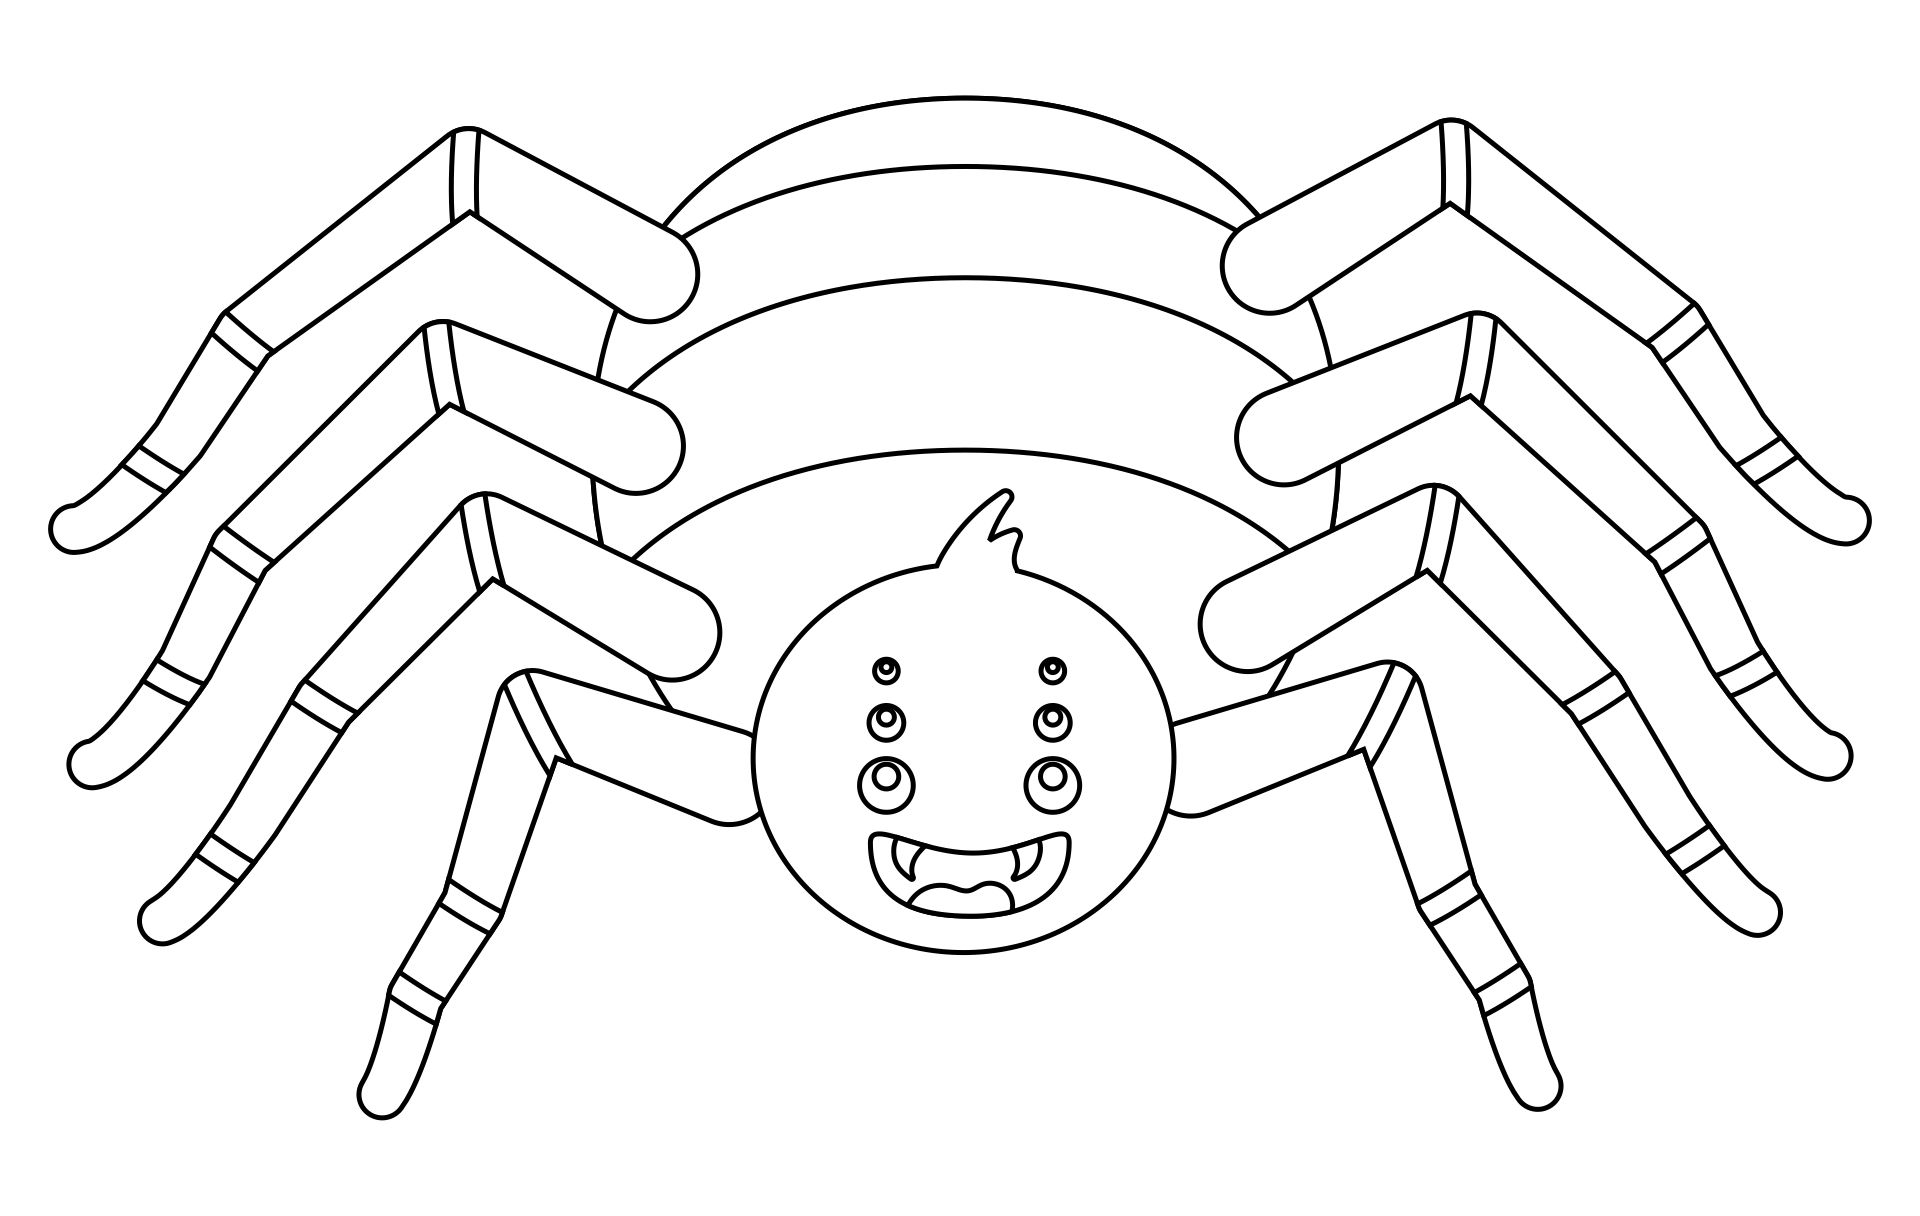 Halloween Printable Spider Coloring Pages - 15 Free PDF Printables ...